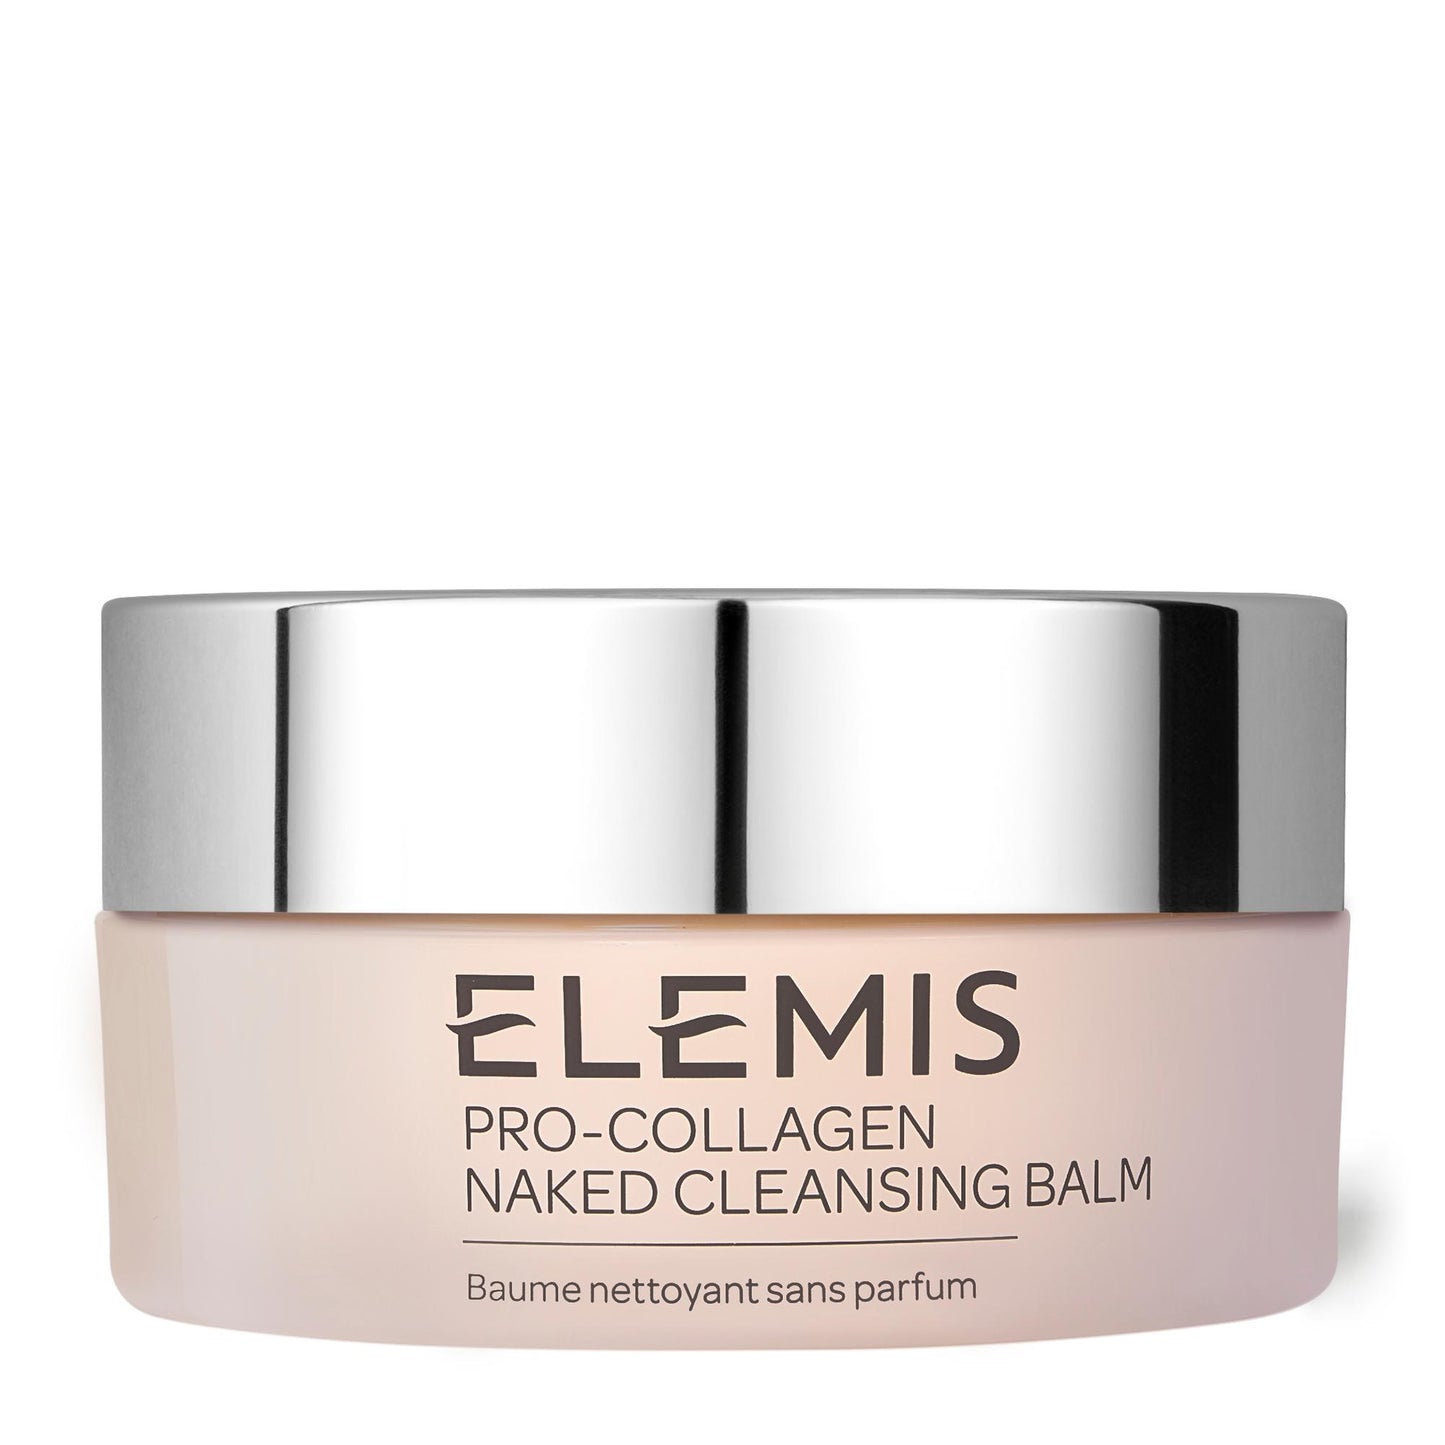 Pro-Collagen Naked Cleansing Balm